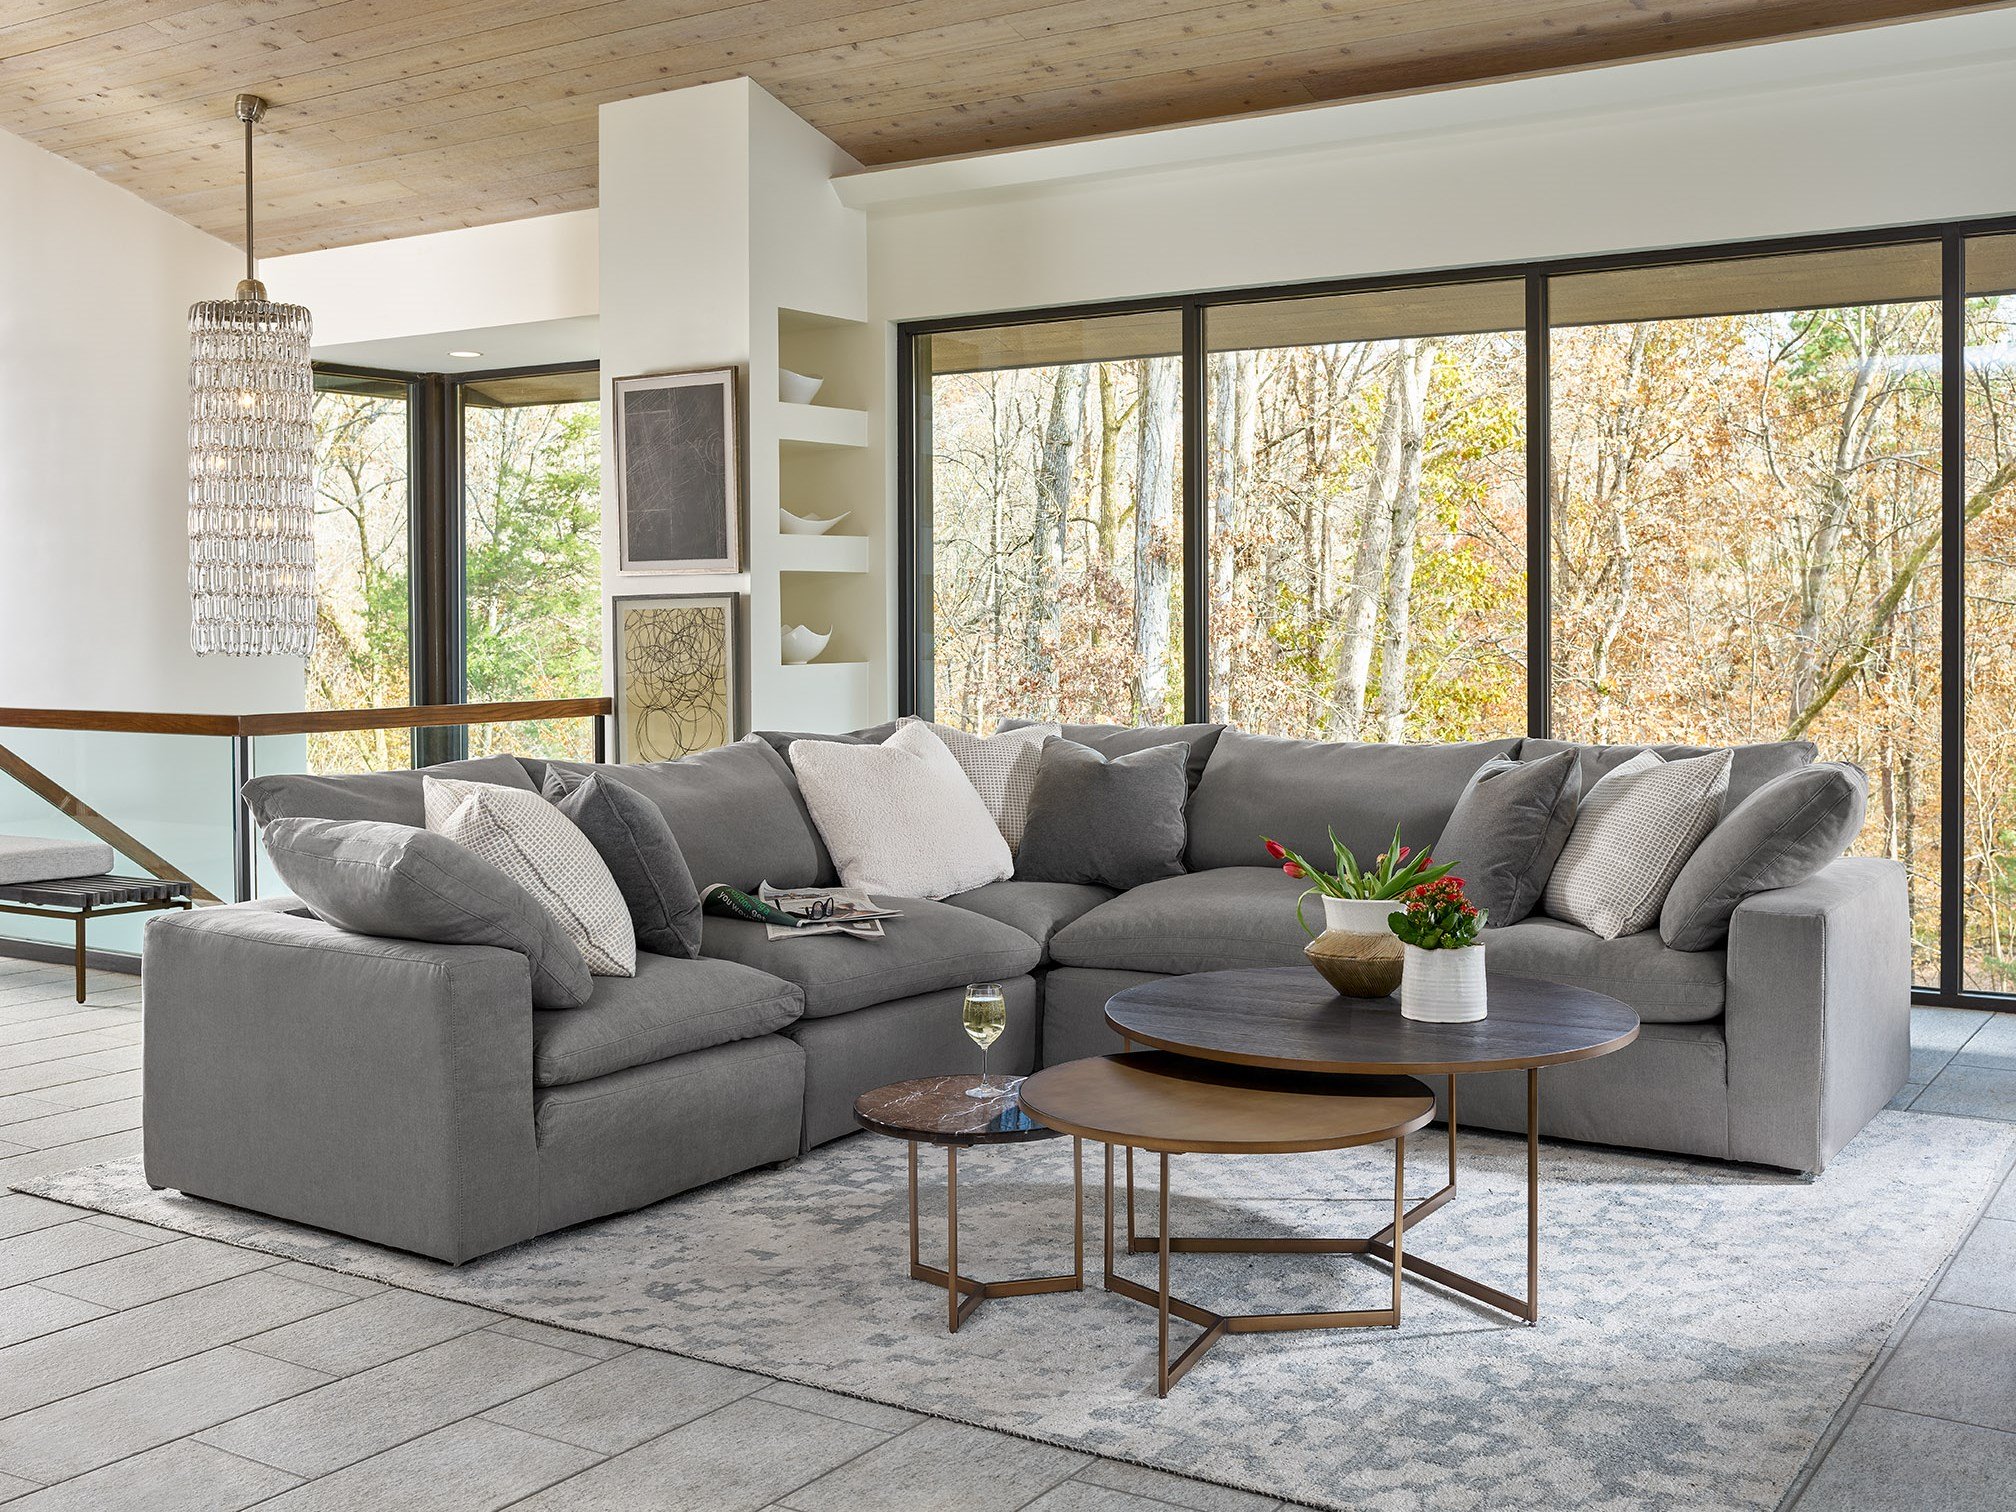 Living room with a grey sectional